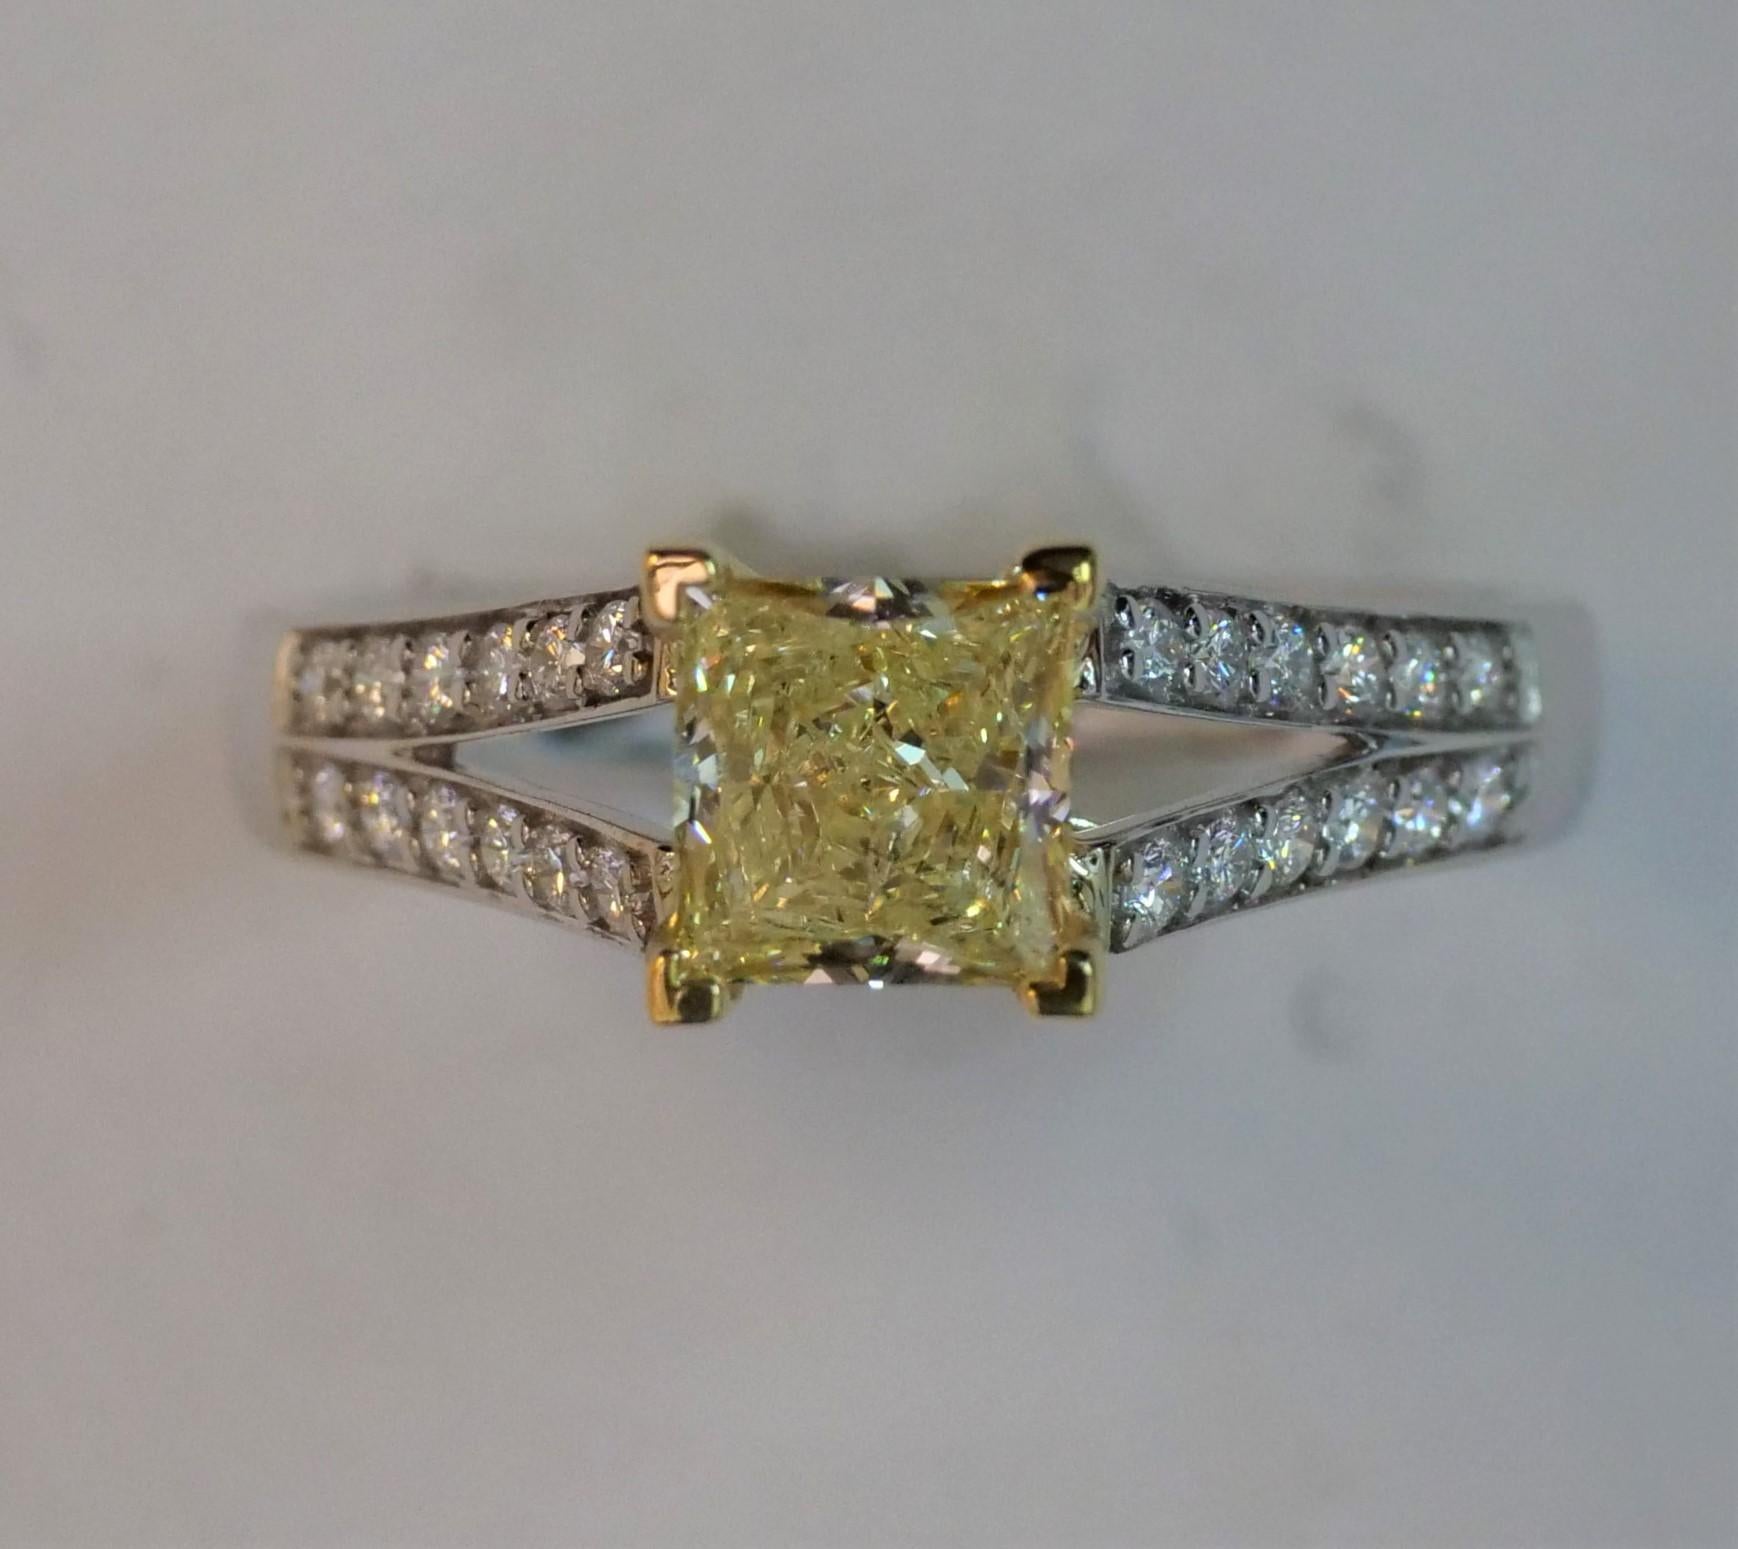 Raregemworld's Natural GIA Certified Fancy Yellow 1.08 carats Princess Cut Diamond Surronded by 24 round white diamonds weighting 0.24 carats.  Set in 18K White and Yellow Gold.

Size 6.5 (sizable upon request)